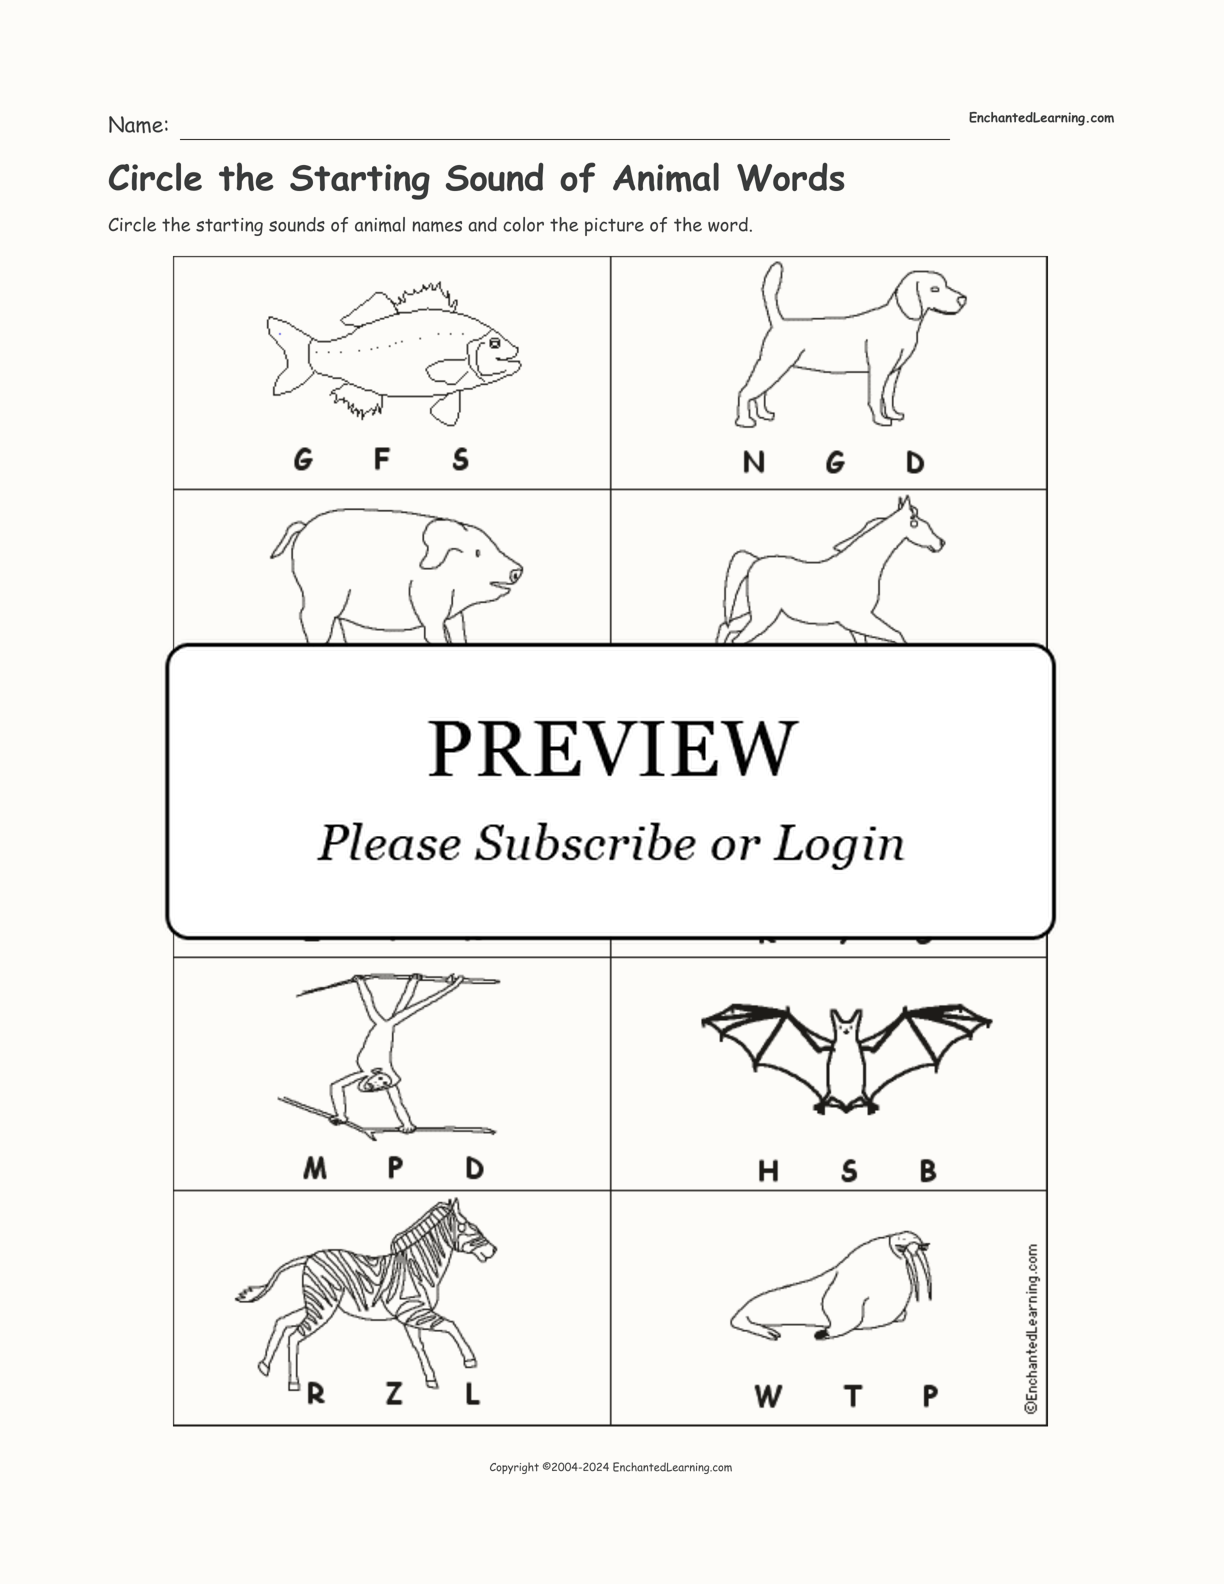 Circle the Starting Sound of Animal Words interactive worksheet page 1